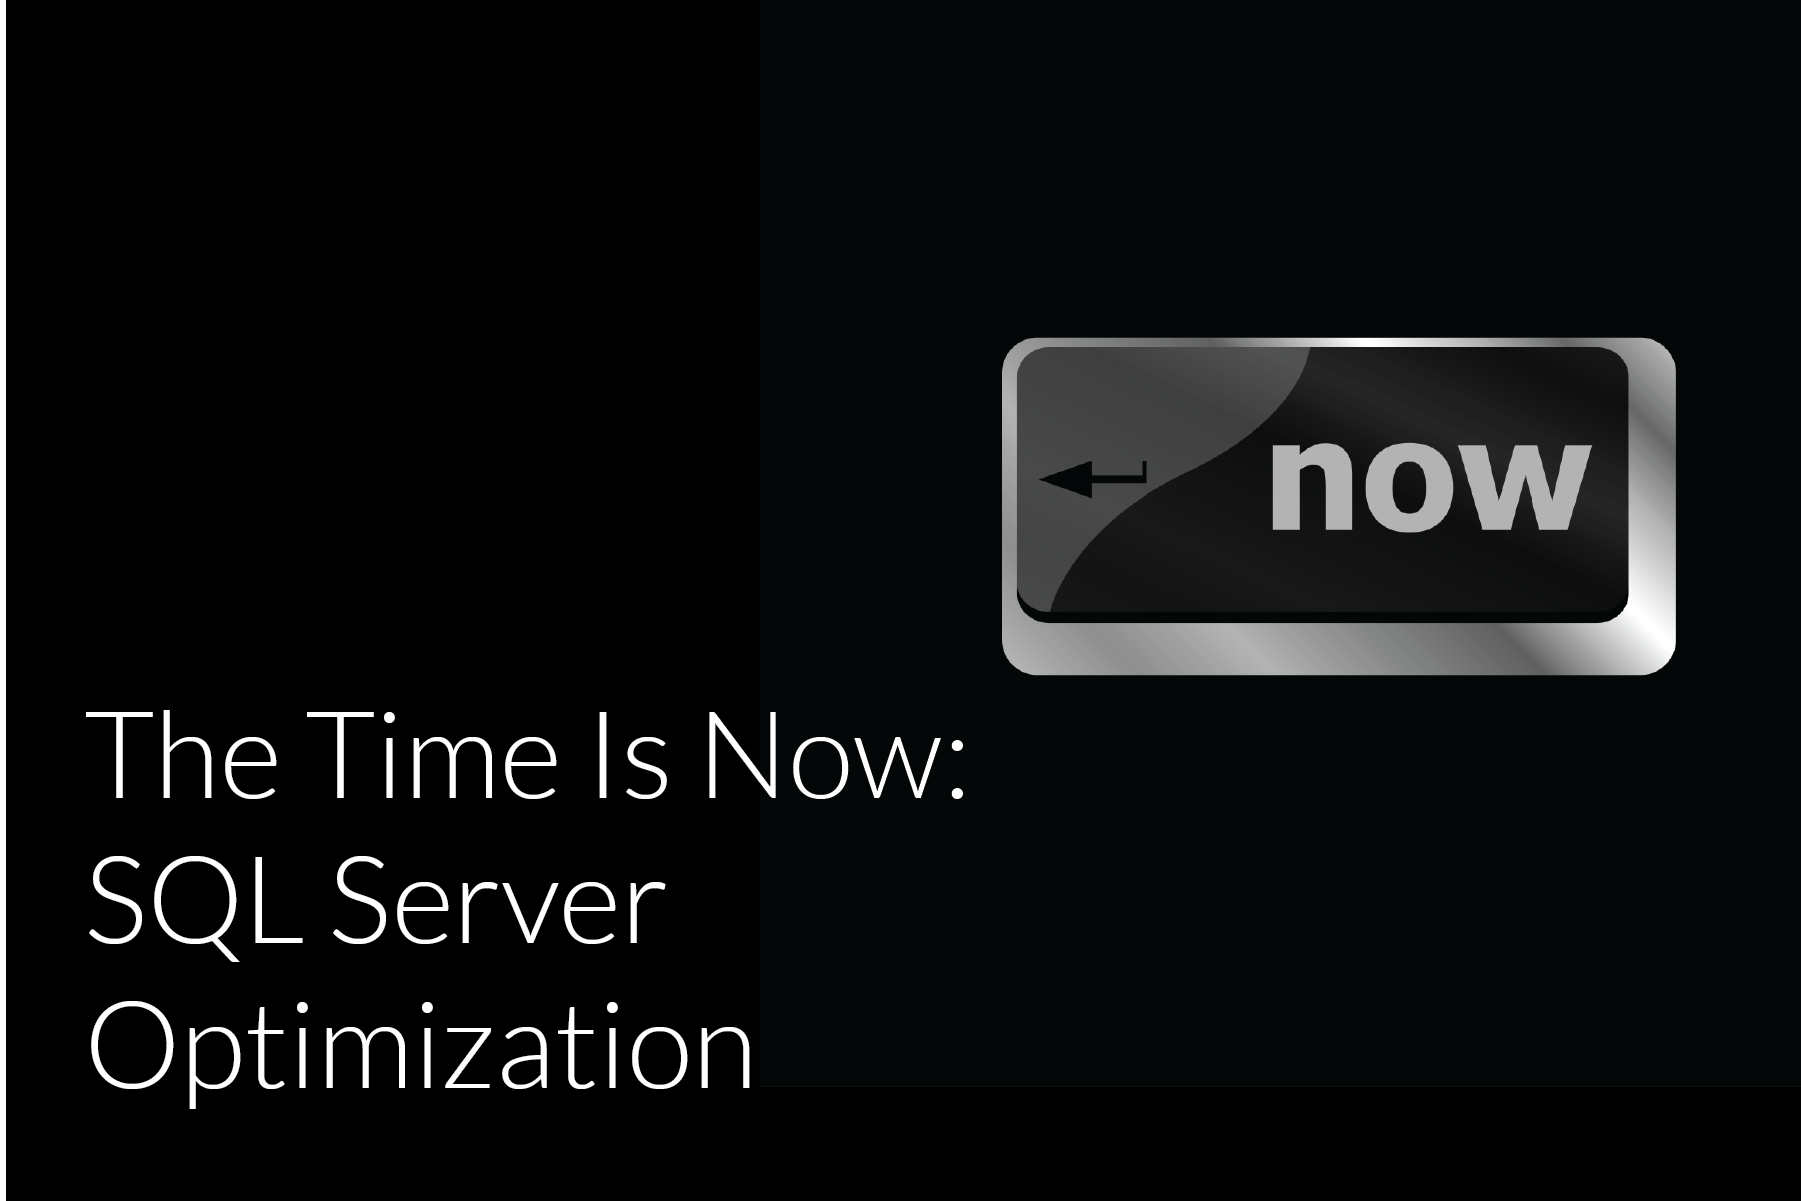 The Time Is Now For SQL Server Optimization